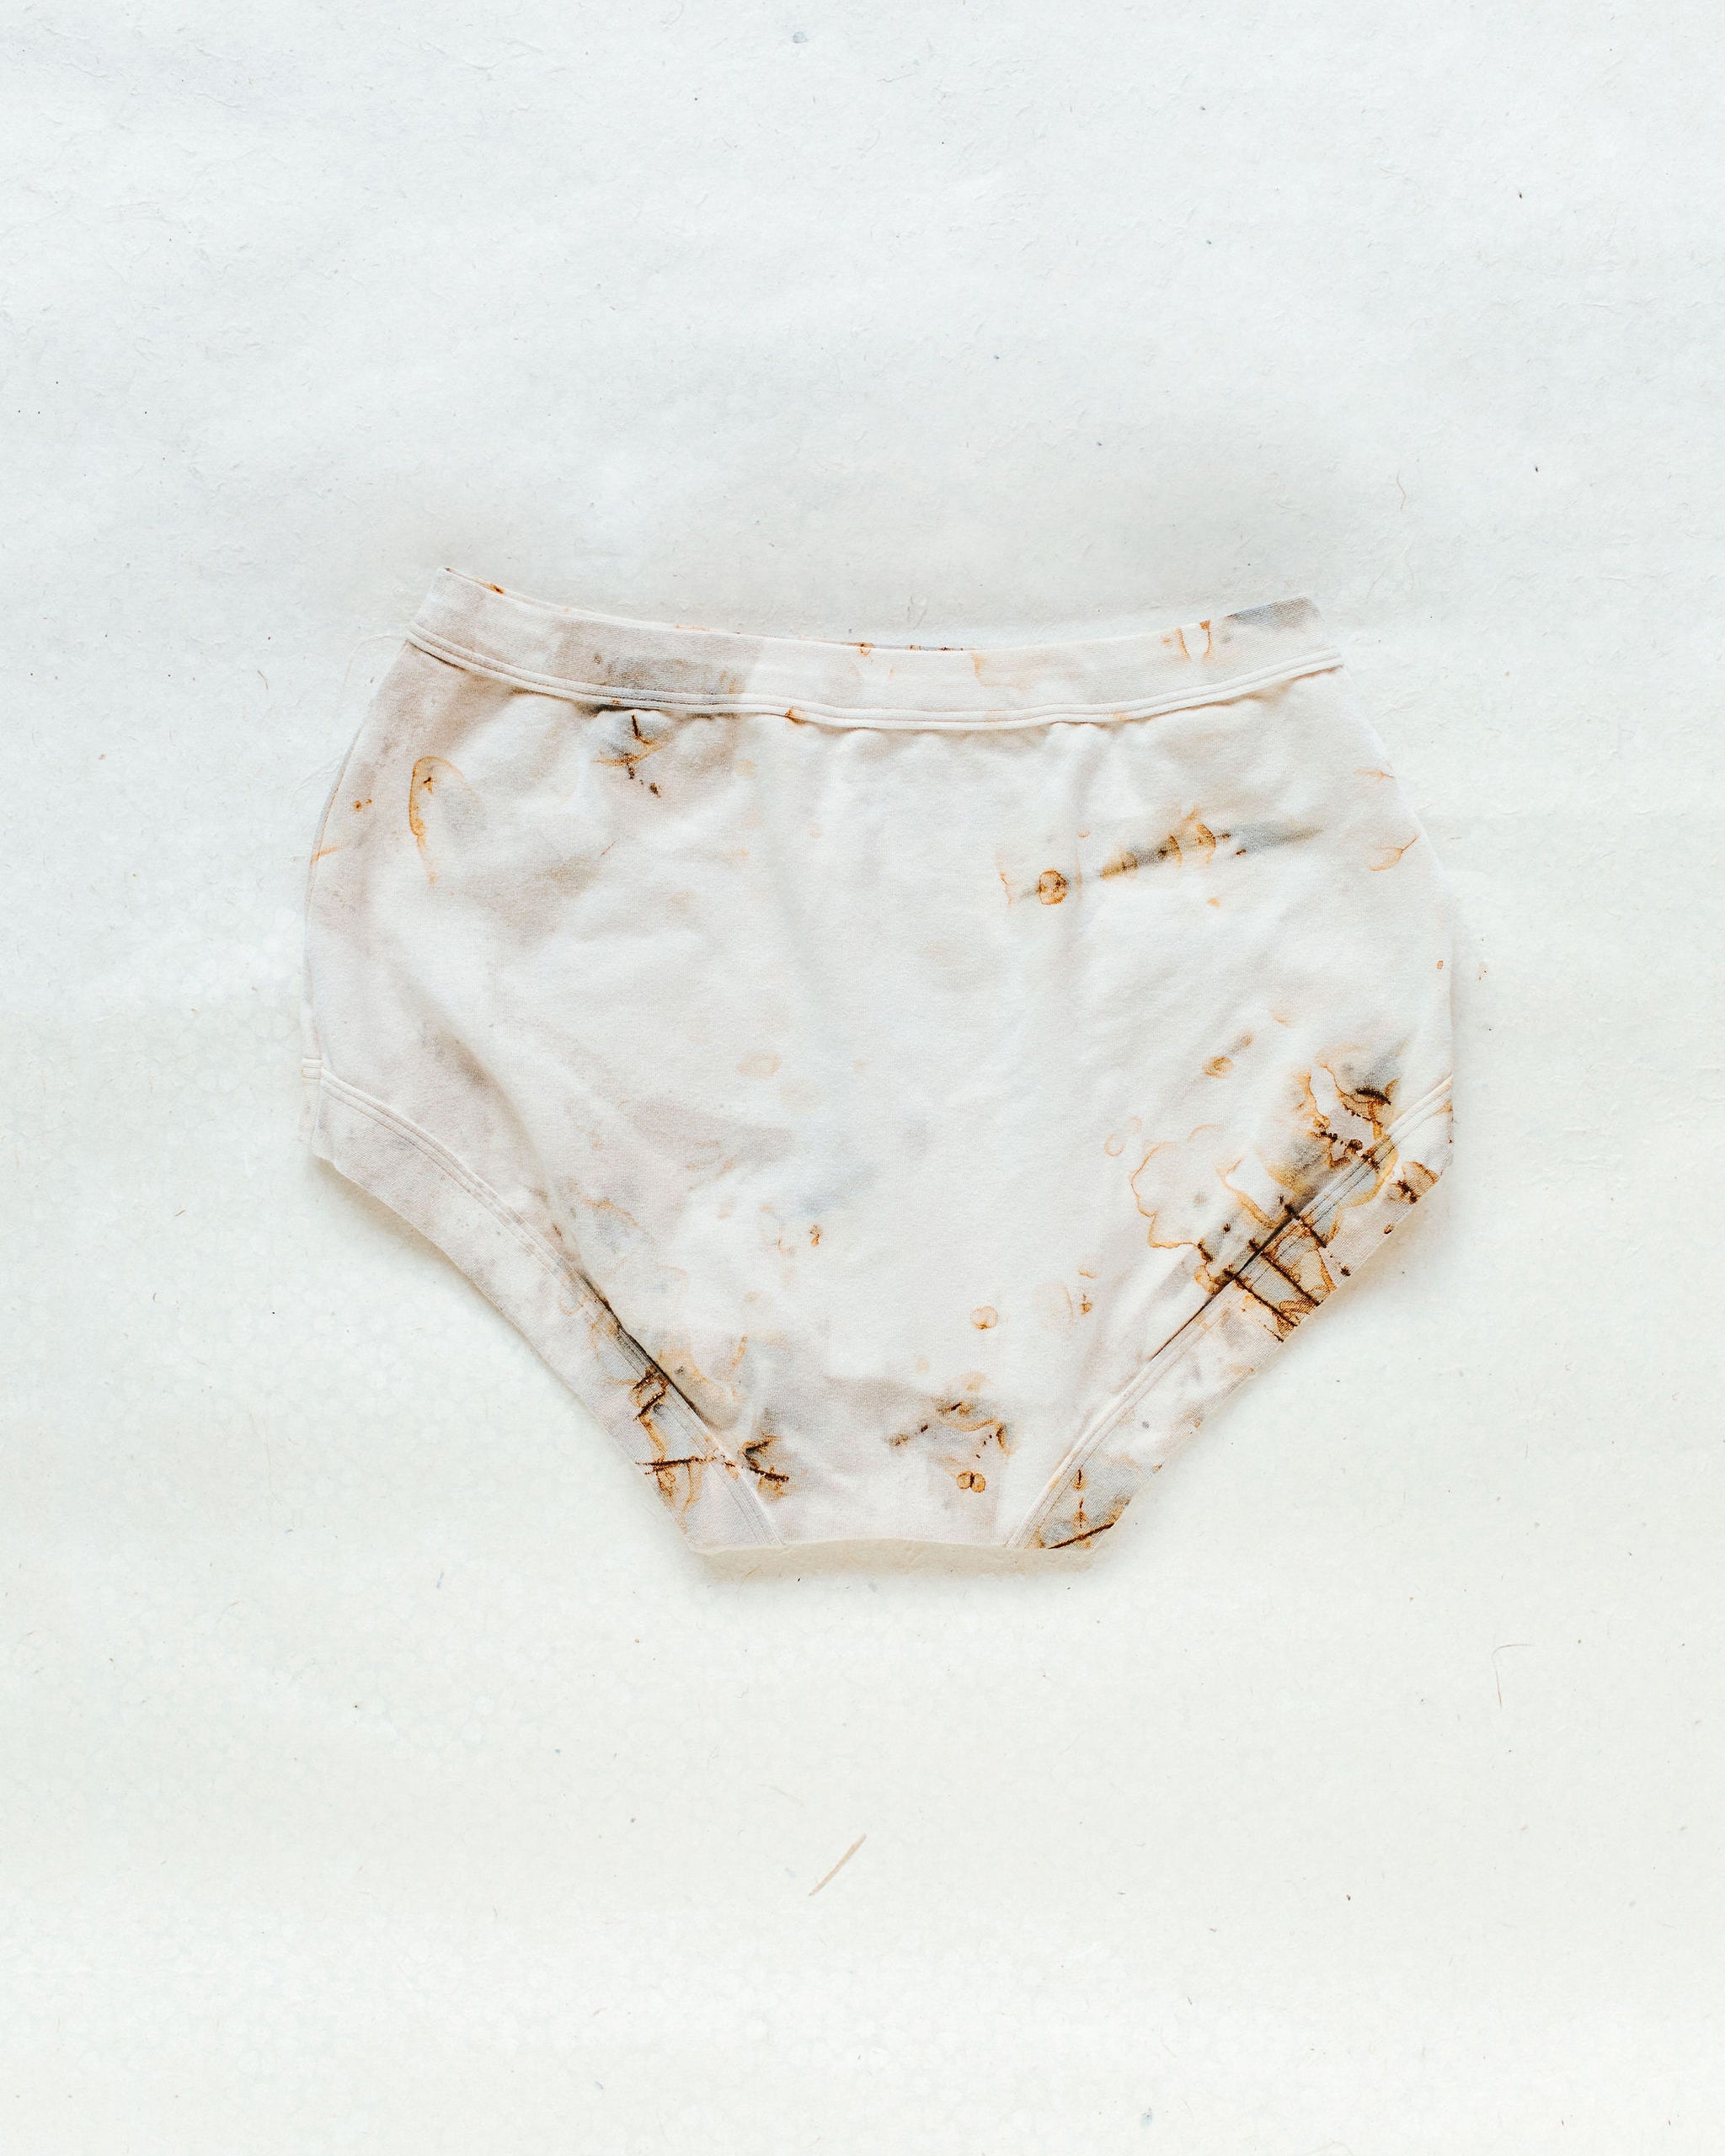 Flat lay of Thunderpants Original style underwear in Mineral Rust Dye.